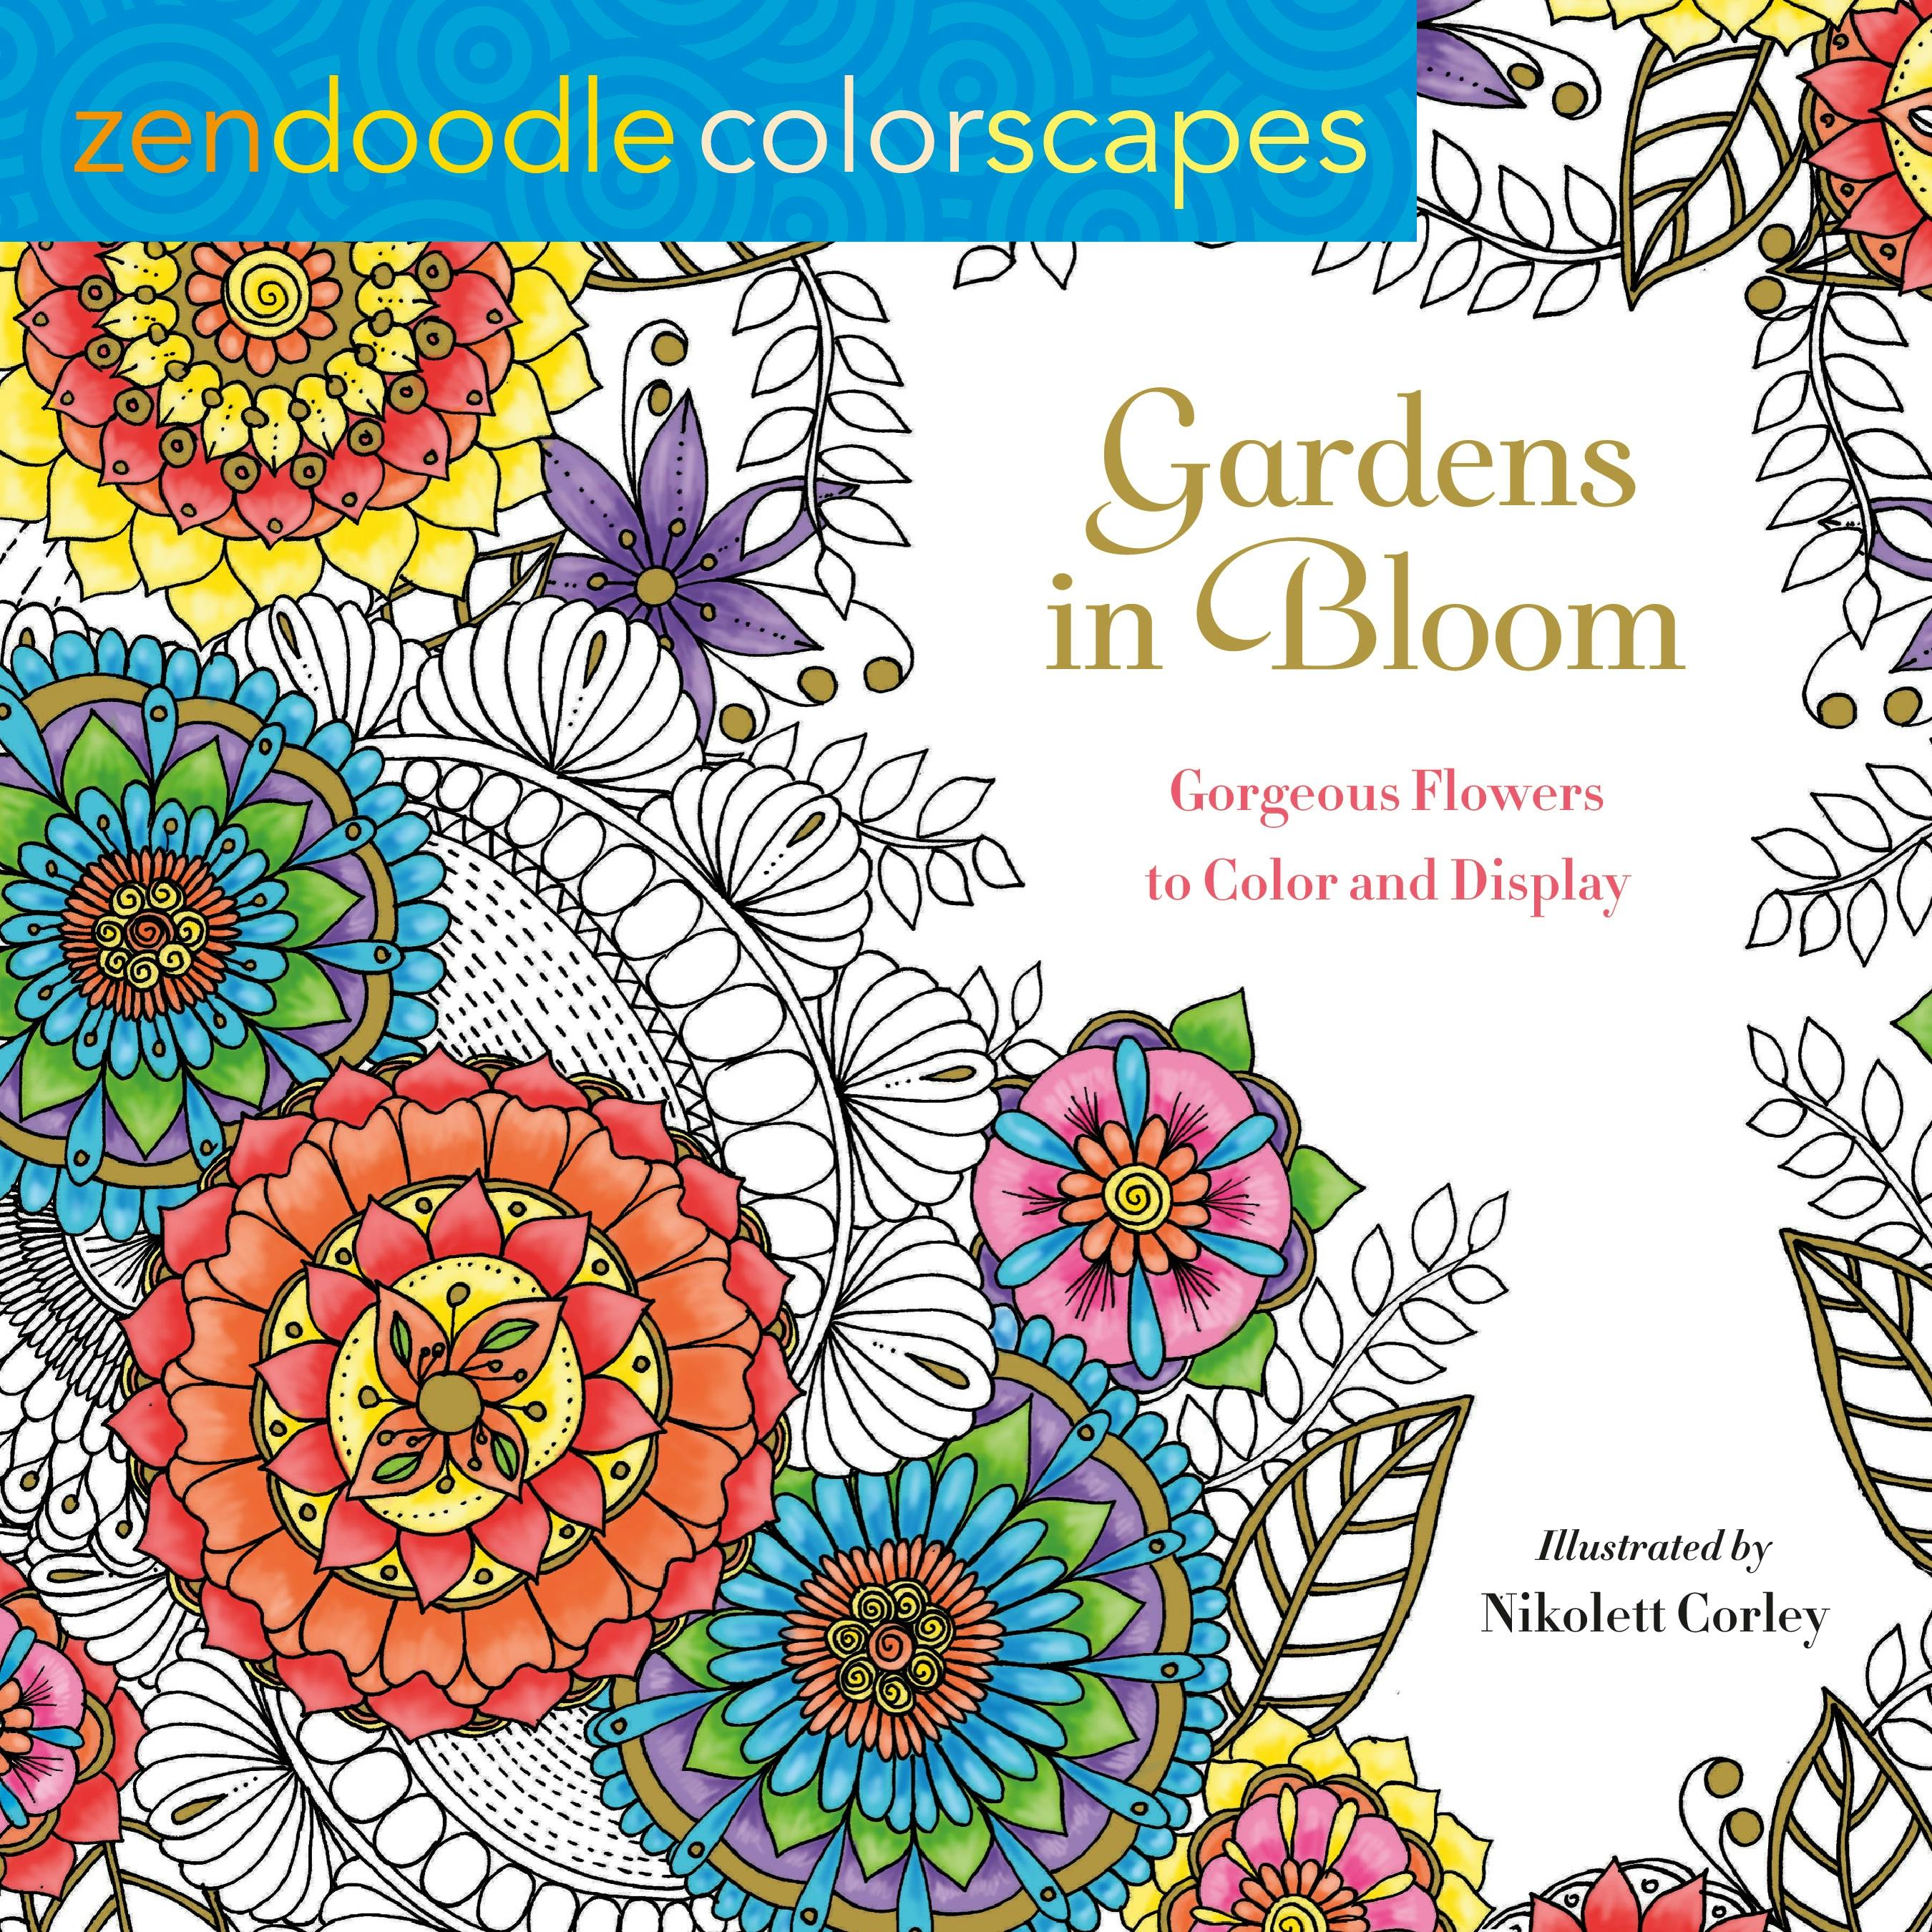 Image of Zendoodle Colorscapes: Gardens in Bloom